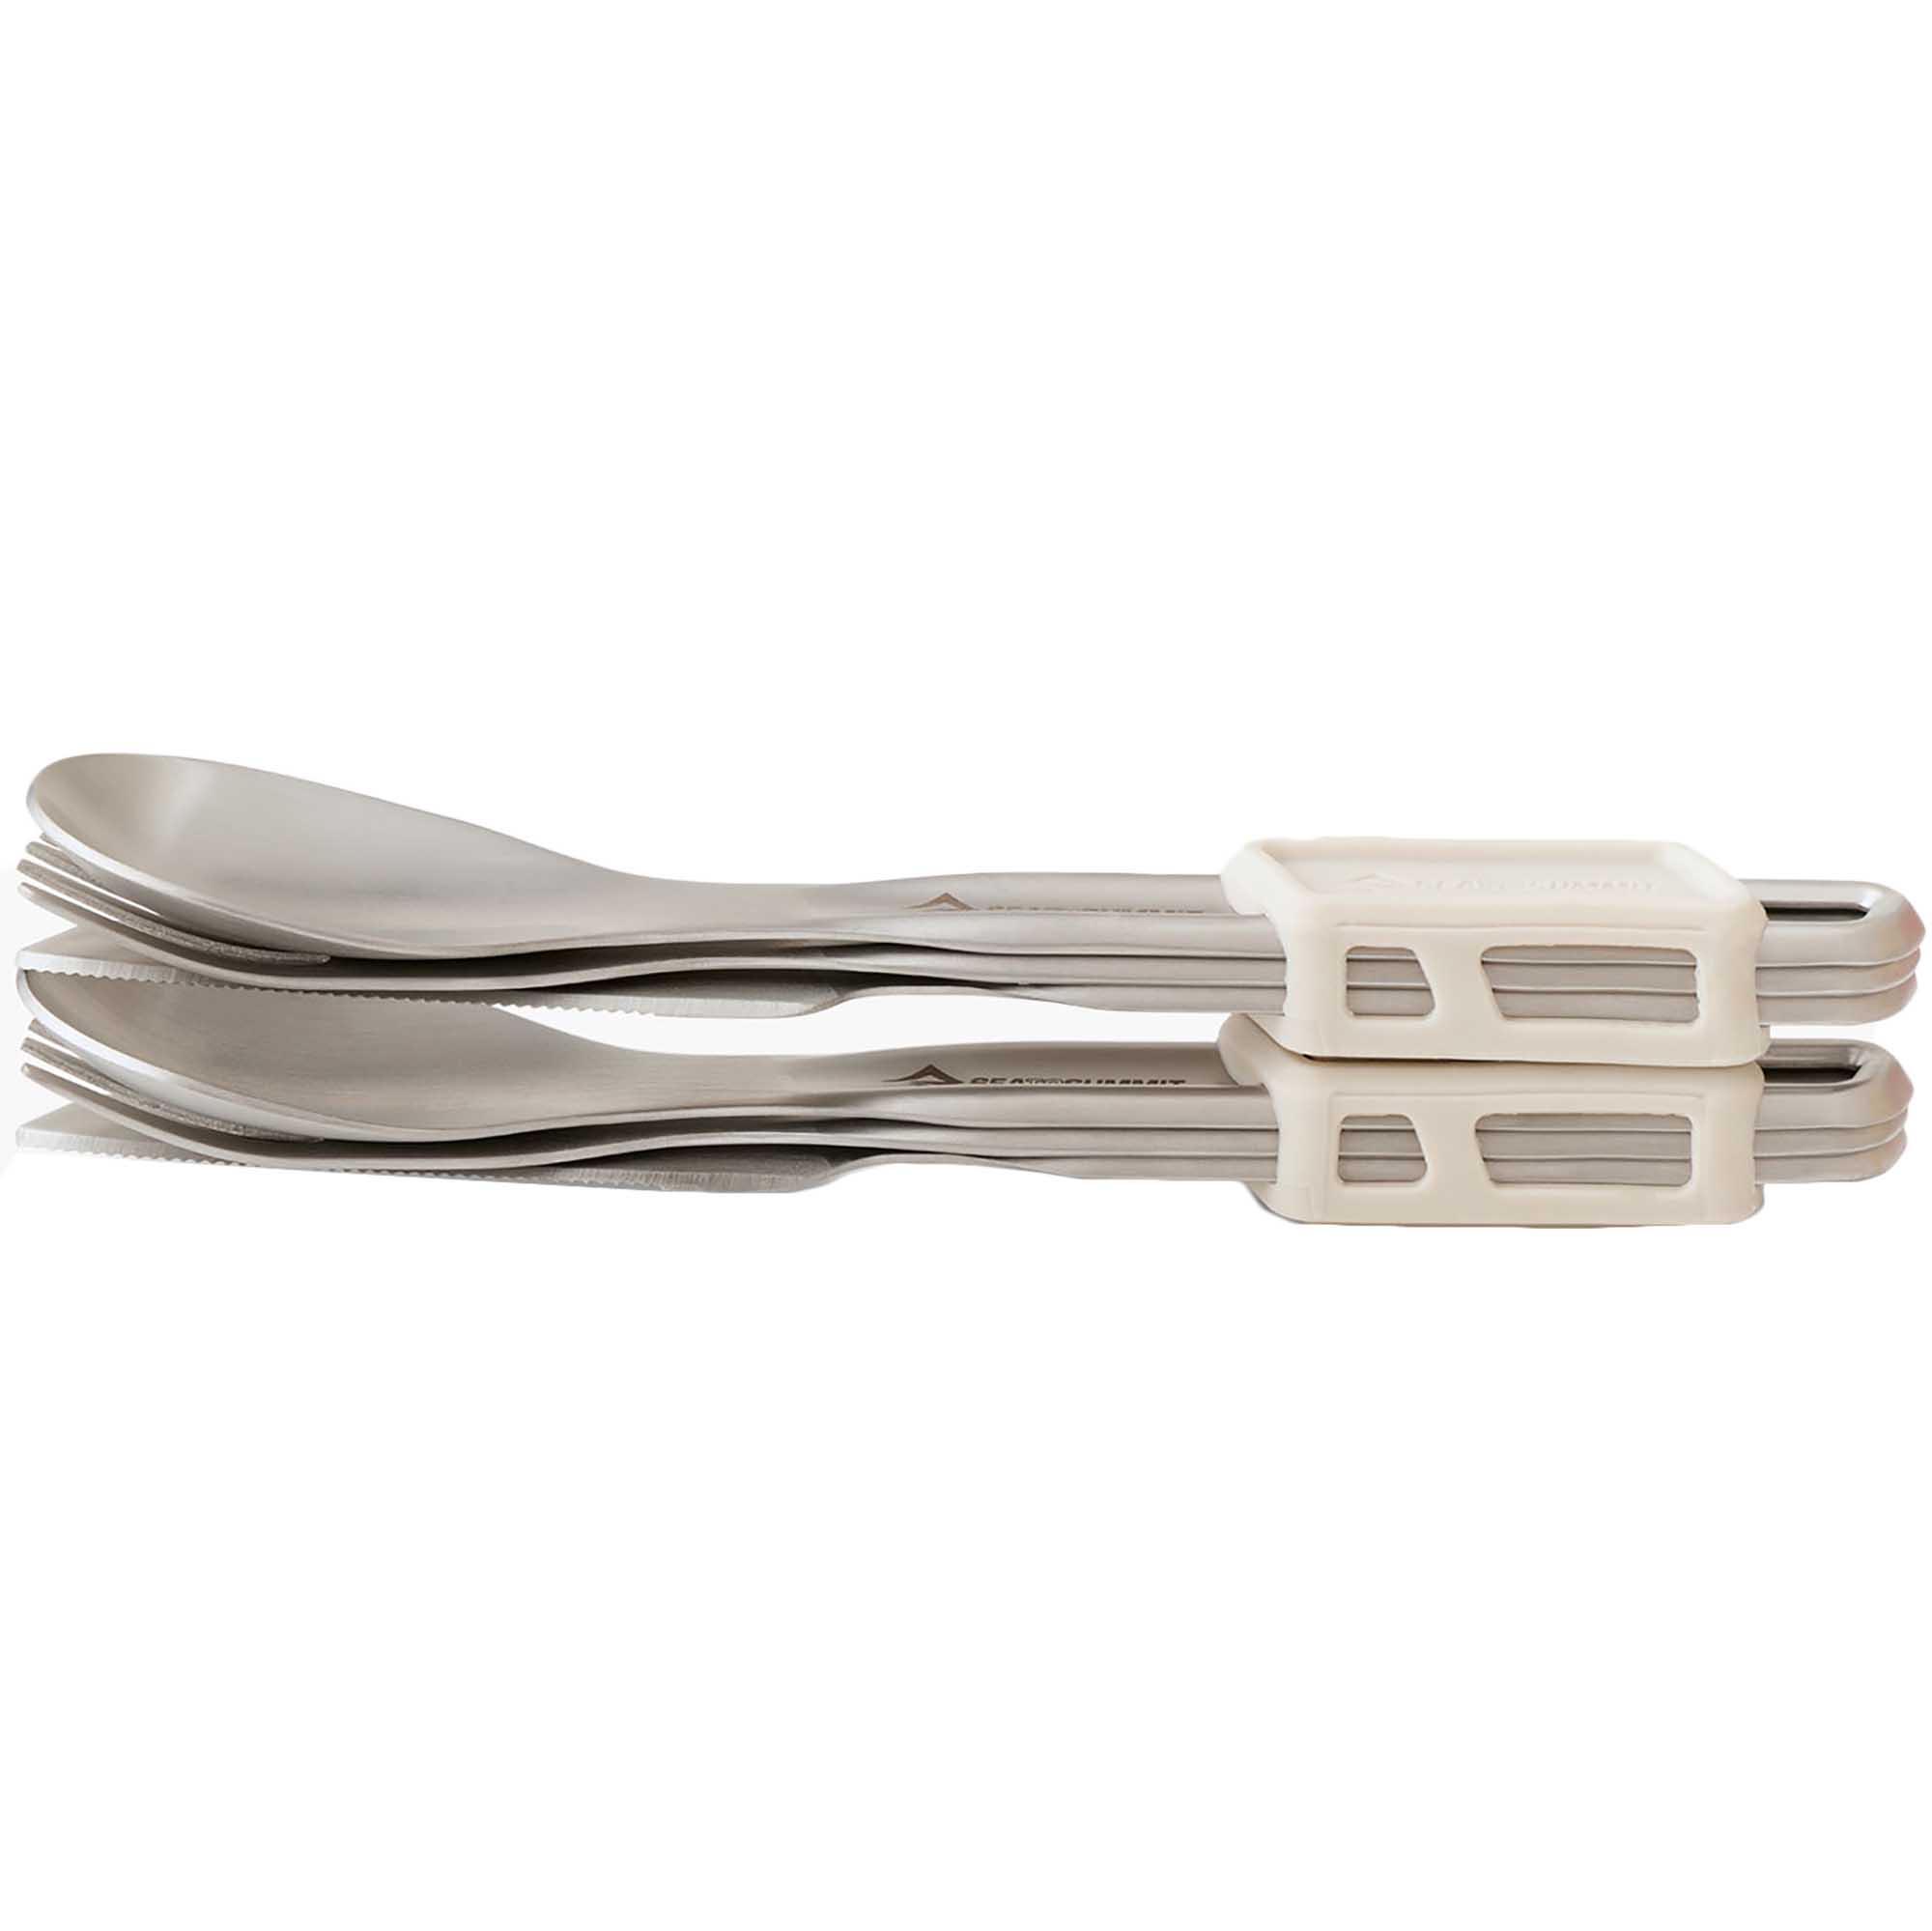 Sea to Summit Detour 6pc Stainless Steel Cutlery Set